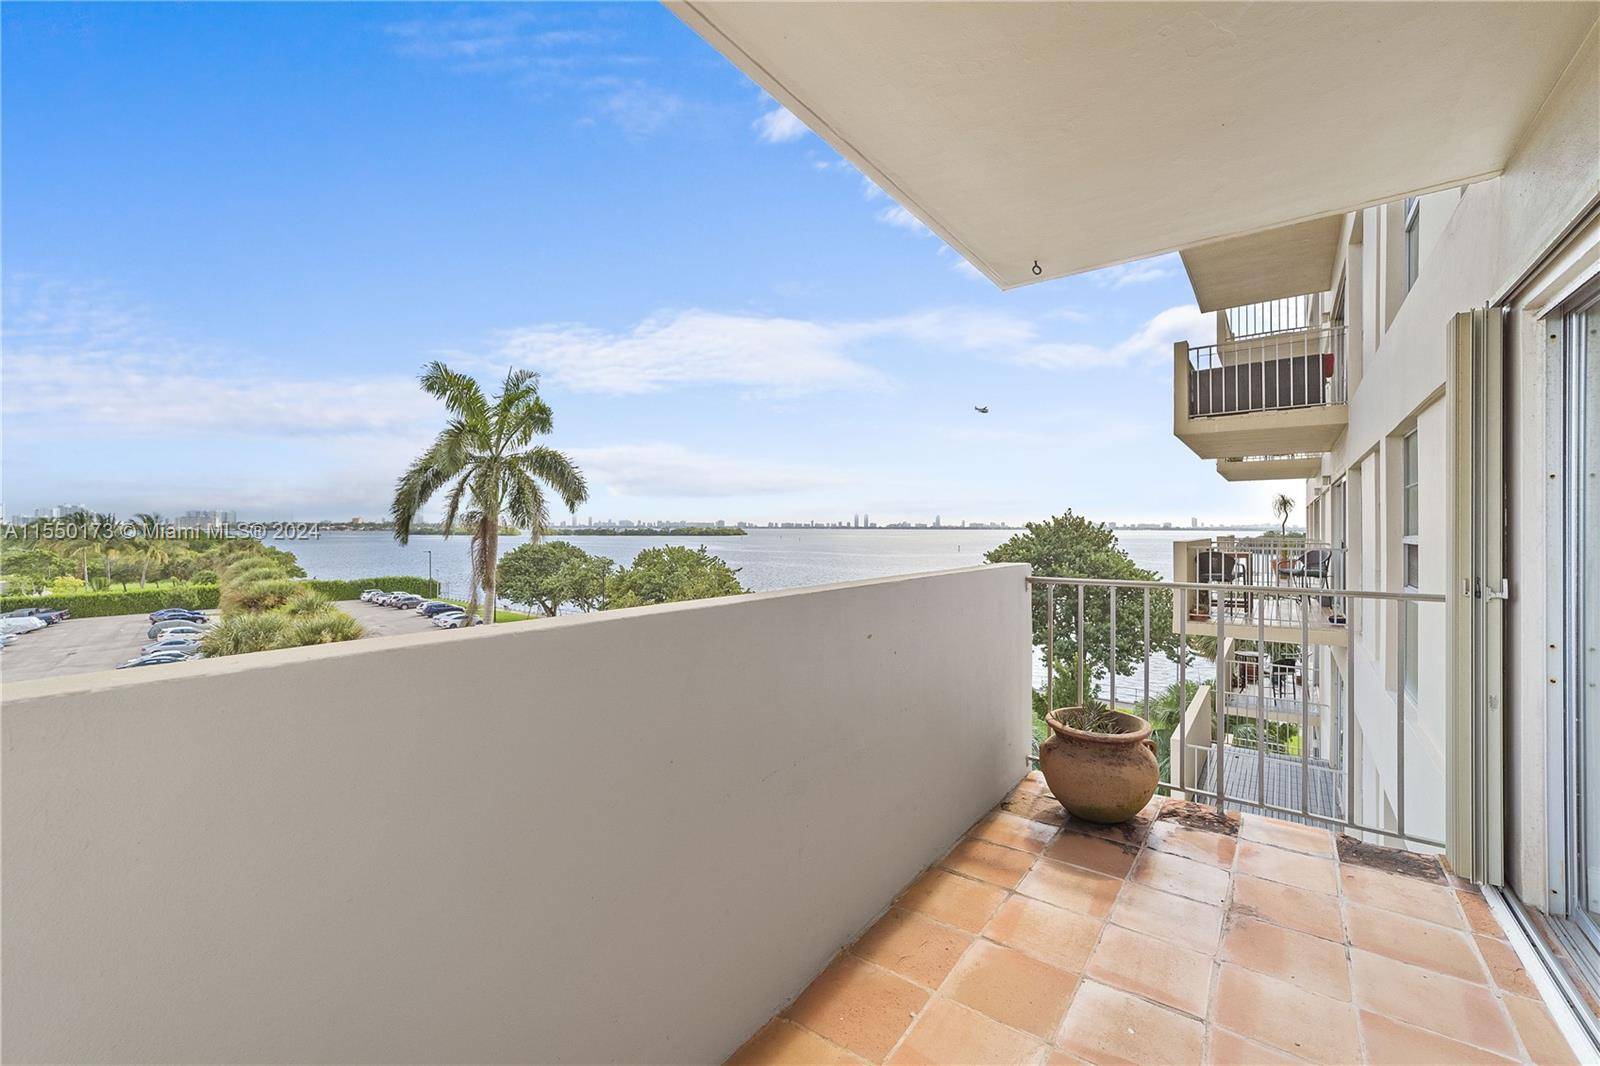 Waterfront living at it's best in Historic Bayside Miami.